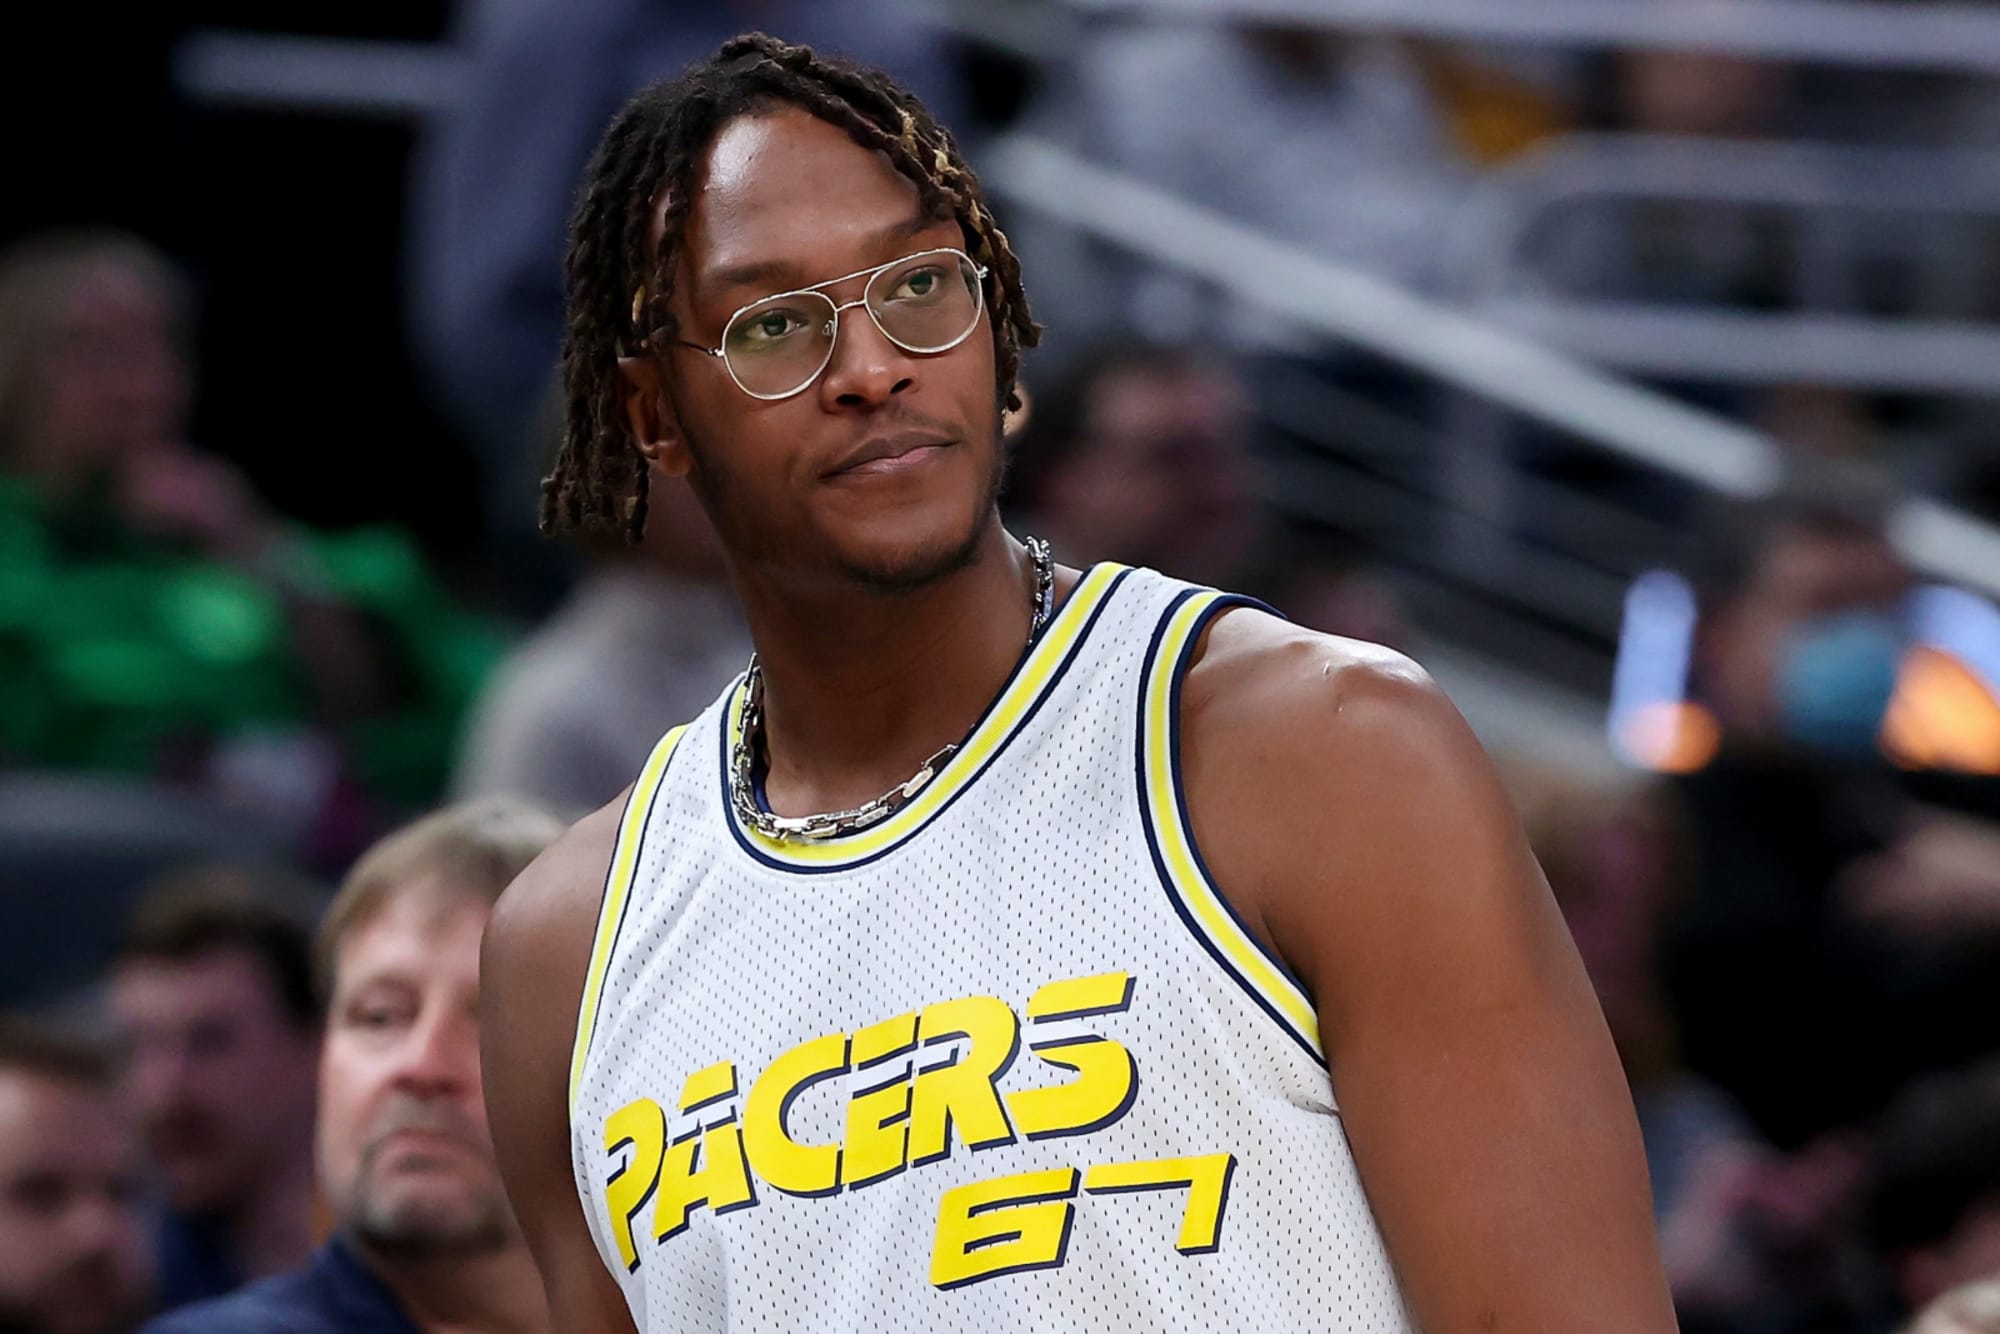 This change could heat up the Myles Turner trade rumors for Pacers